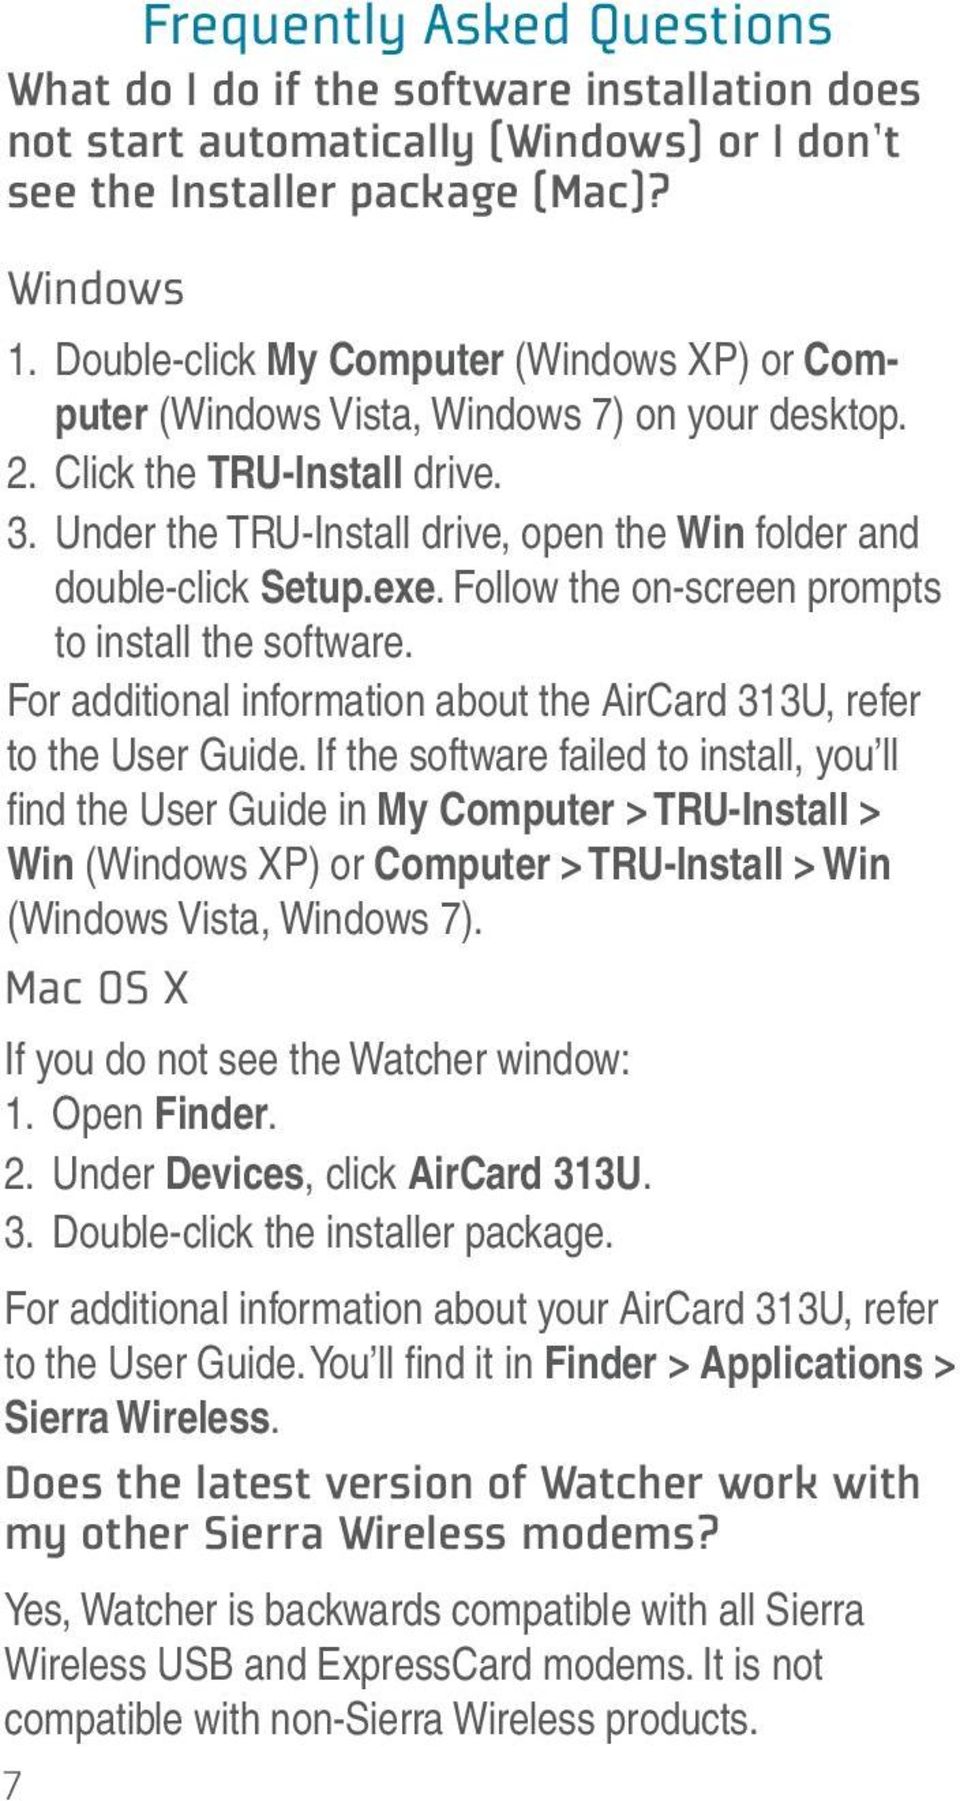 Under the TRU-Install drive, open the Win folder and double-click Setup.exe. Follow the on-screen prompts to install the software.